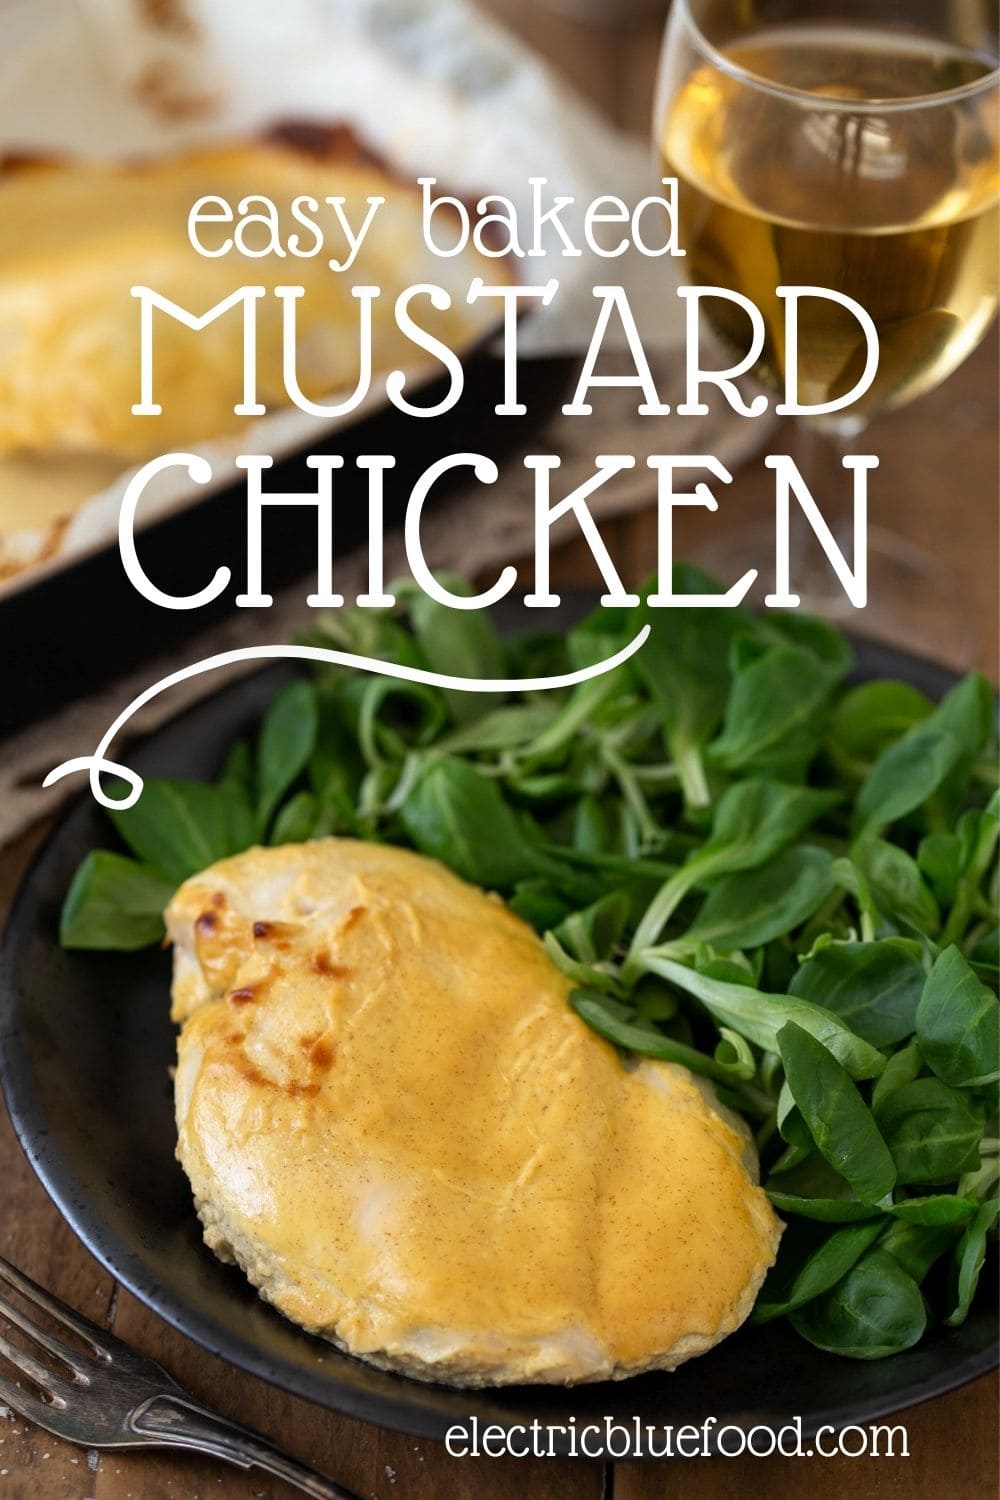 Baked chicken breasts with mustard, an easy dish that requires very little preparation and lands you a healthy simple dinner in just over a half hour.